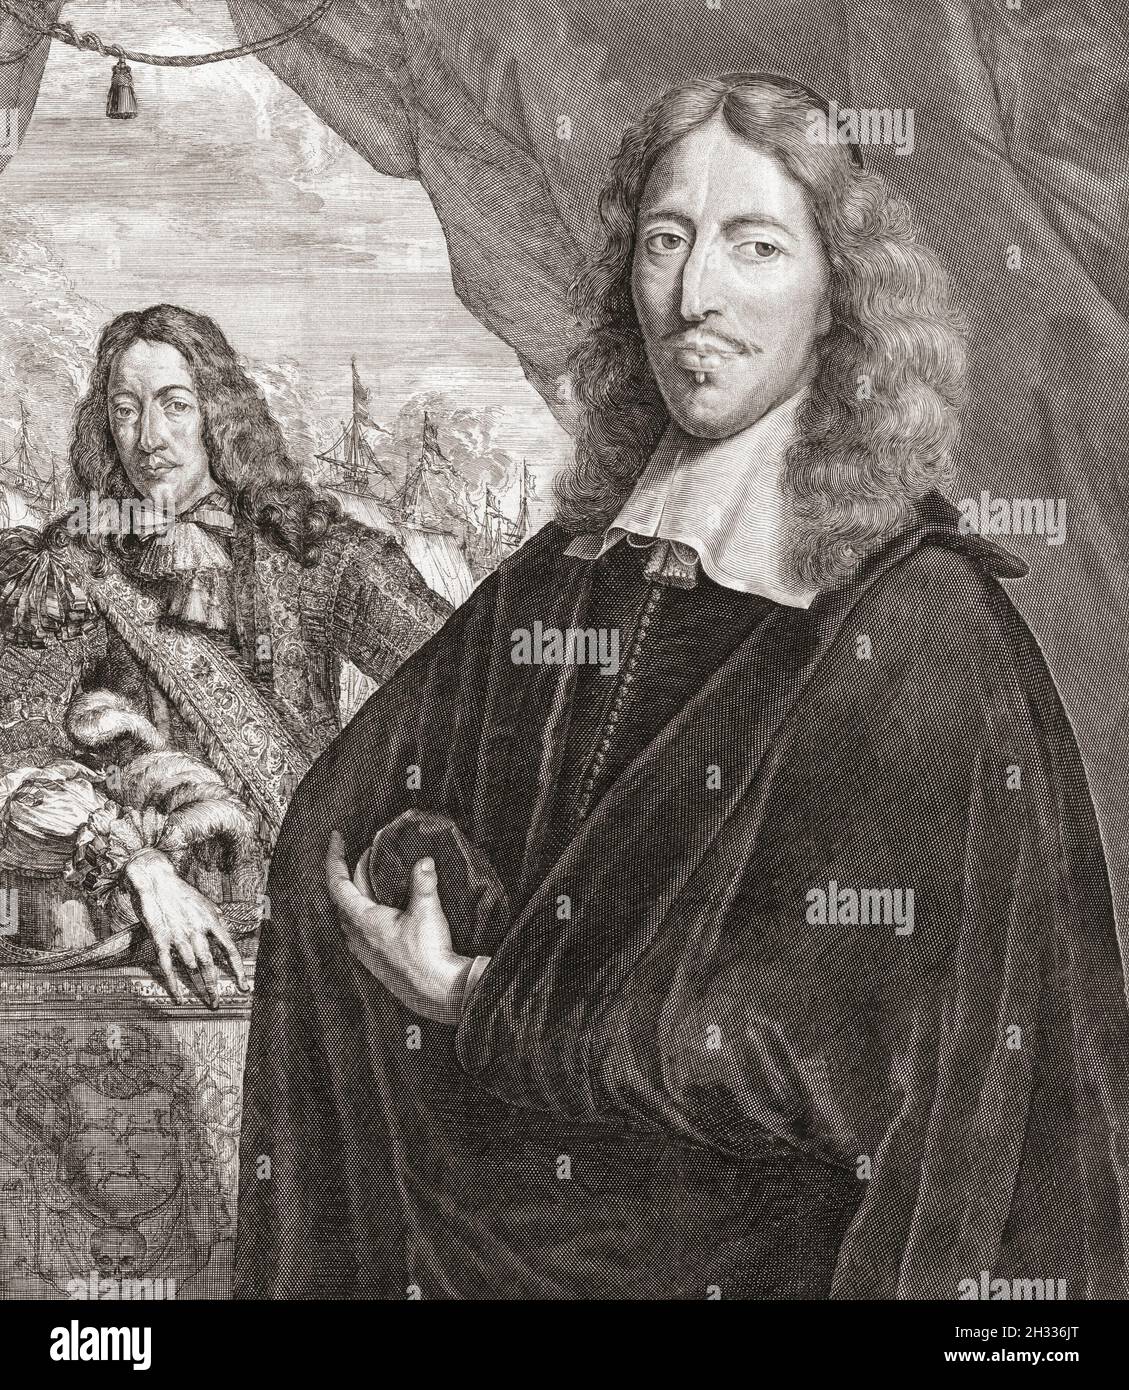 Johan de Witt aka Jan de Witt, 1625 – 1672 (right) and his brother Cornelis de Witt, 1623 - 1672 (left).  Both were Dutch politicians, Johan being the Grand Pensionary of Holland.  The brothers were lynched by supporters of William of Orange on August 20, 1672.  From a print by Lambert Visscher after a work by Jan de Baen. Stock Photo